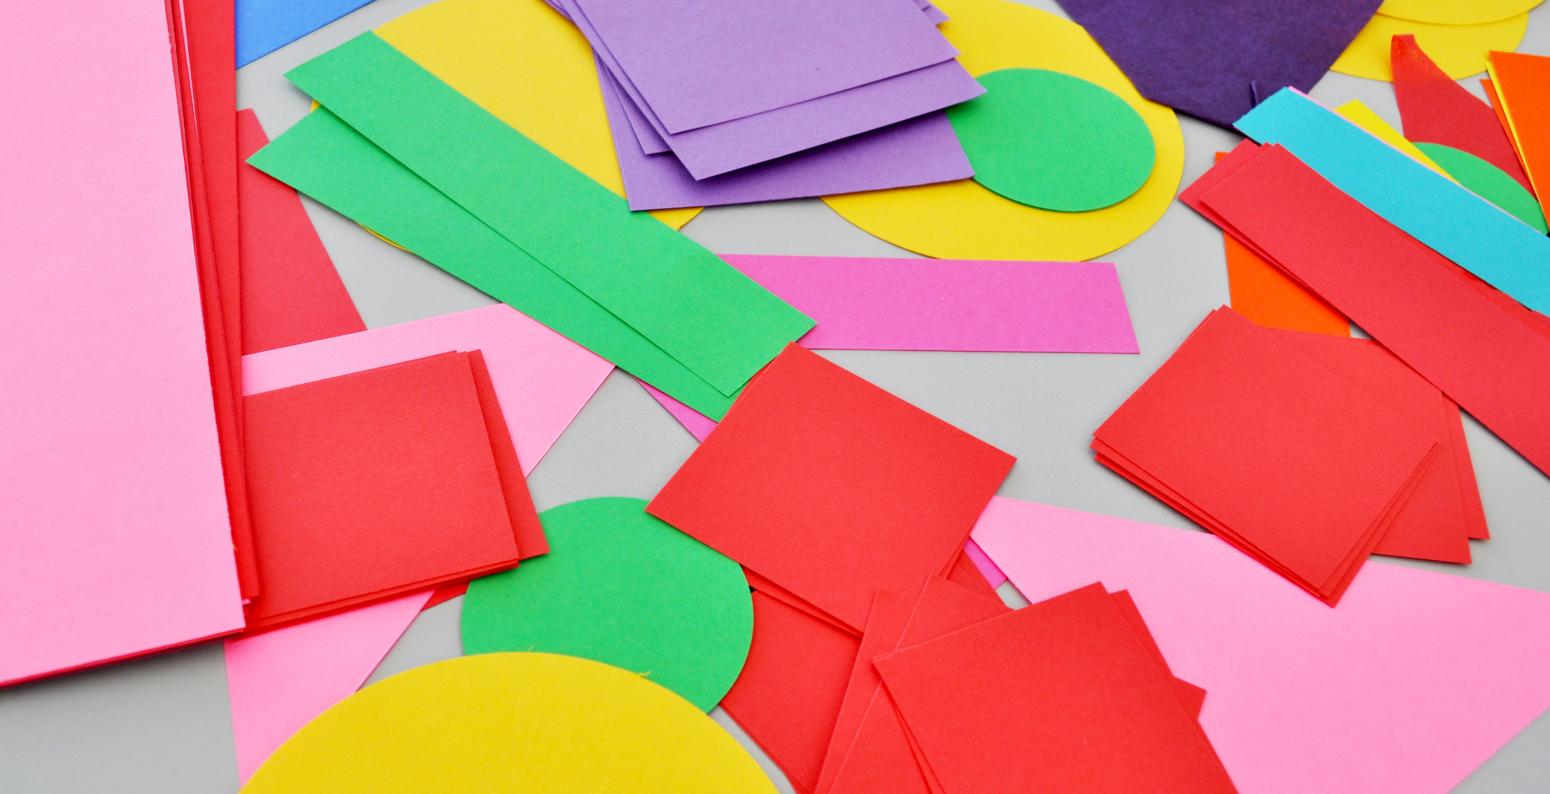 A colorful array of paper shapes including green rectangles, yellow circles, red squares, and pink triangles.